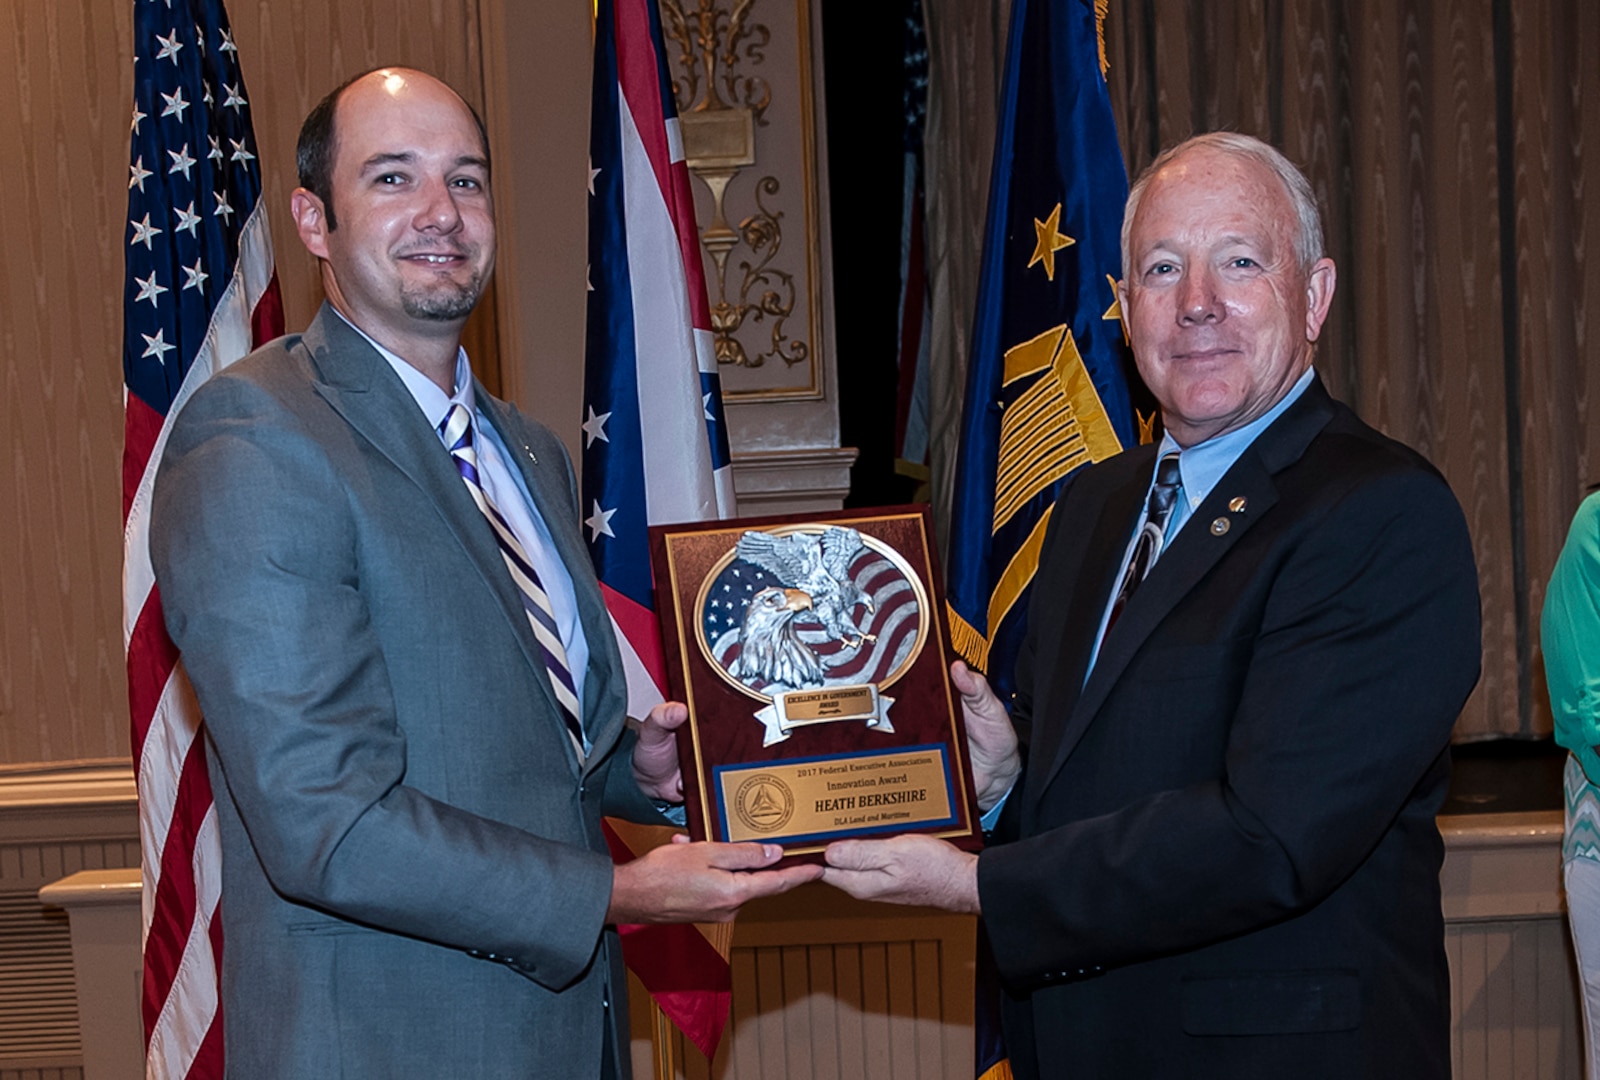 DLA Land and Maritime Deputy Commander and Federal Executive Association Chair James McClaugherty (right) presents Heath Berkshire with the Individual Innovation award for a large agency.